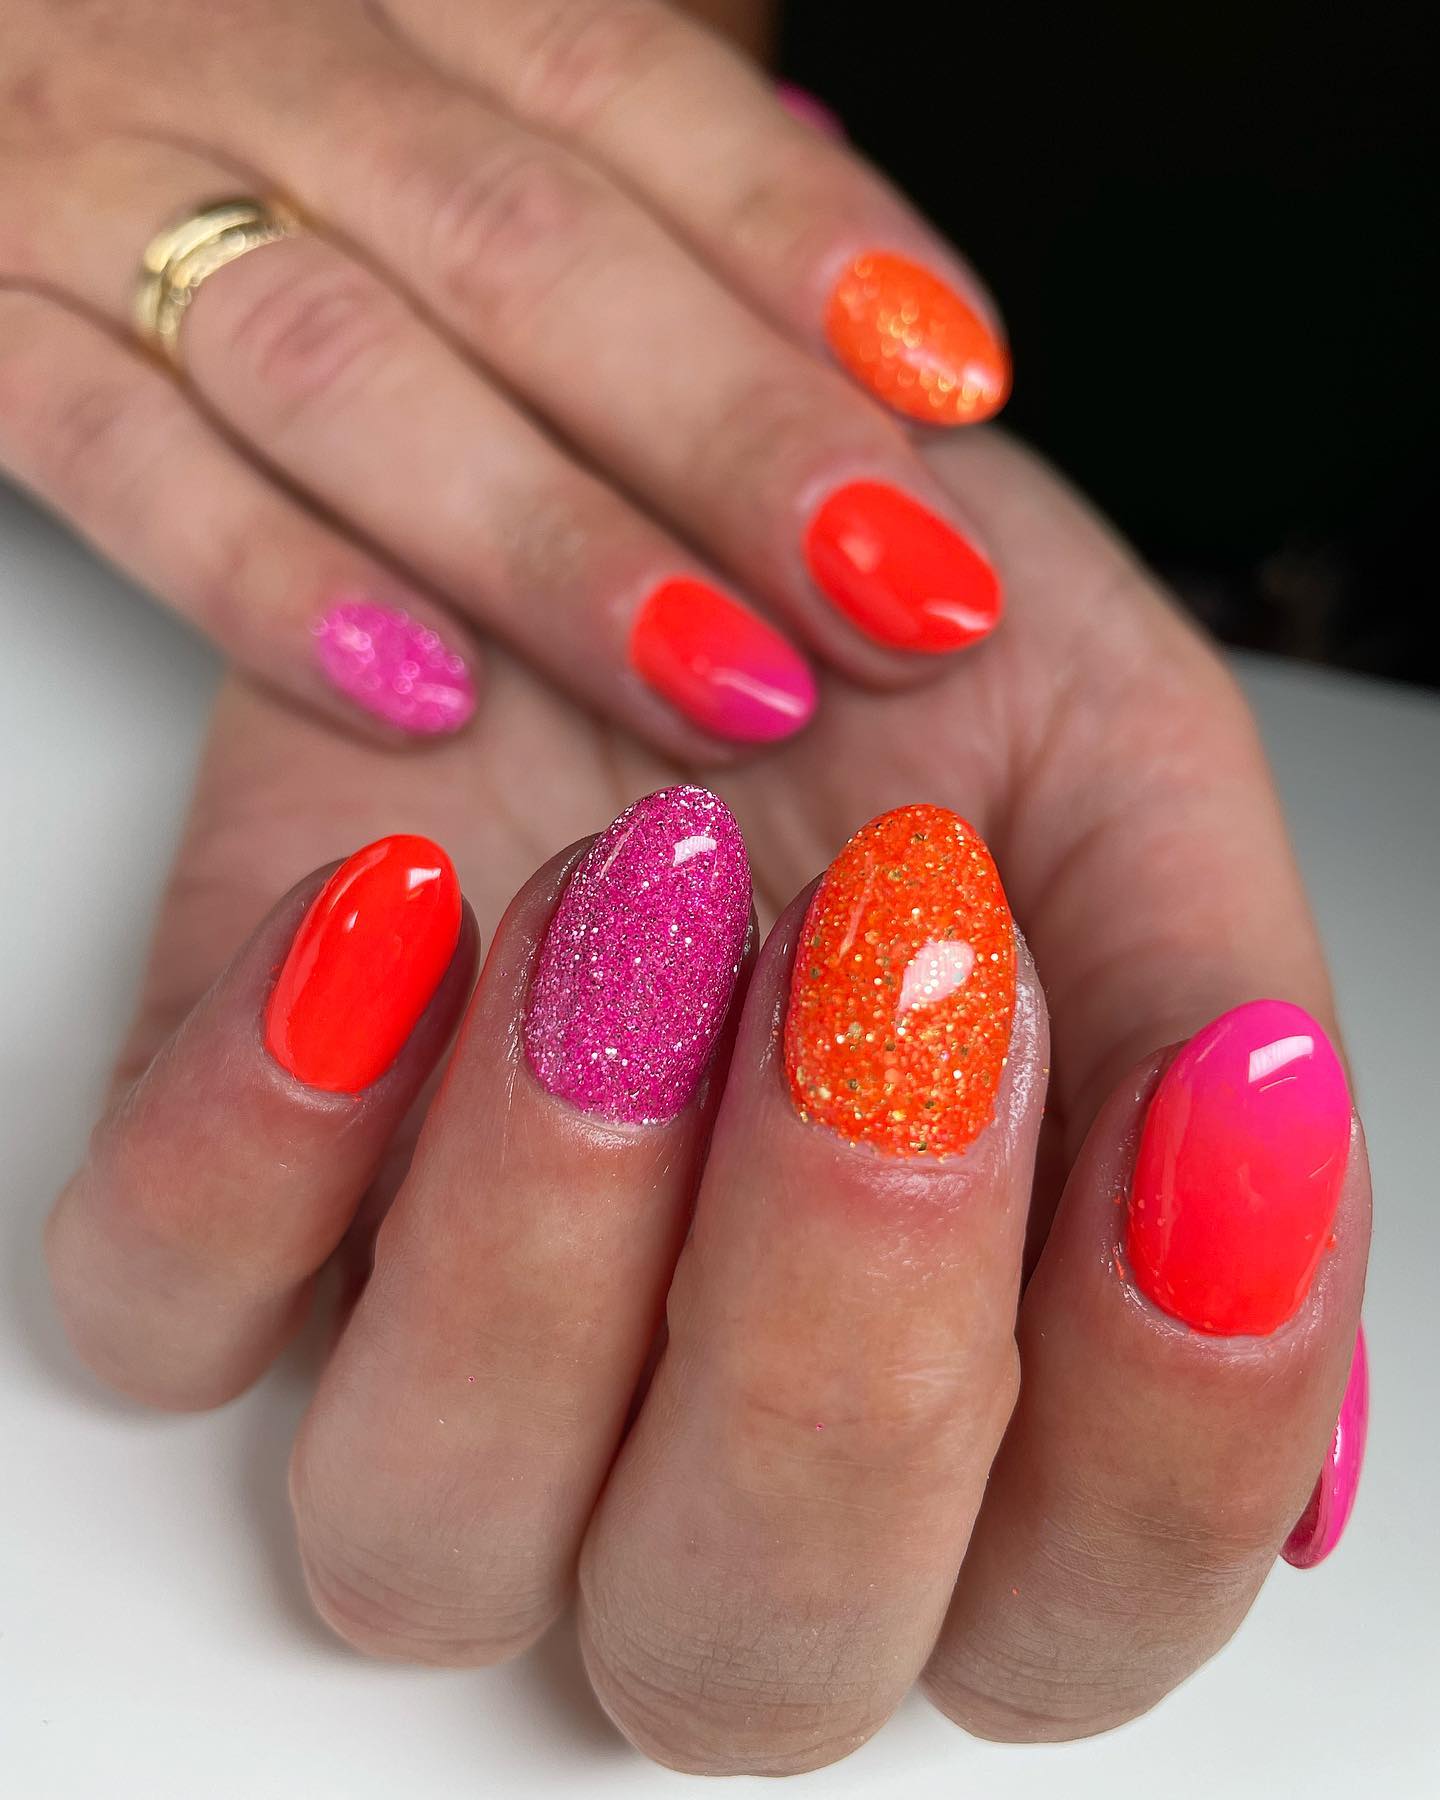 Bright orange and pink colors represent the warmth to its fullest. To make your nails shinier, you can use a glittered transparent nail polish on them.